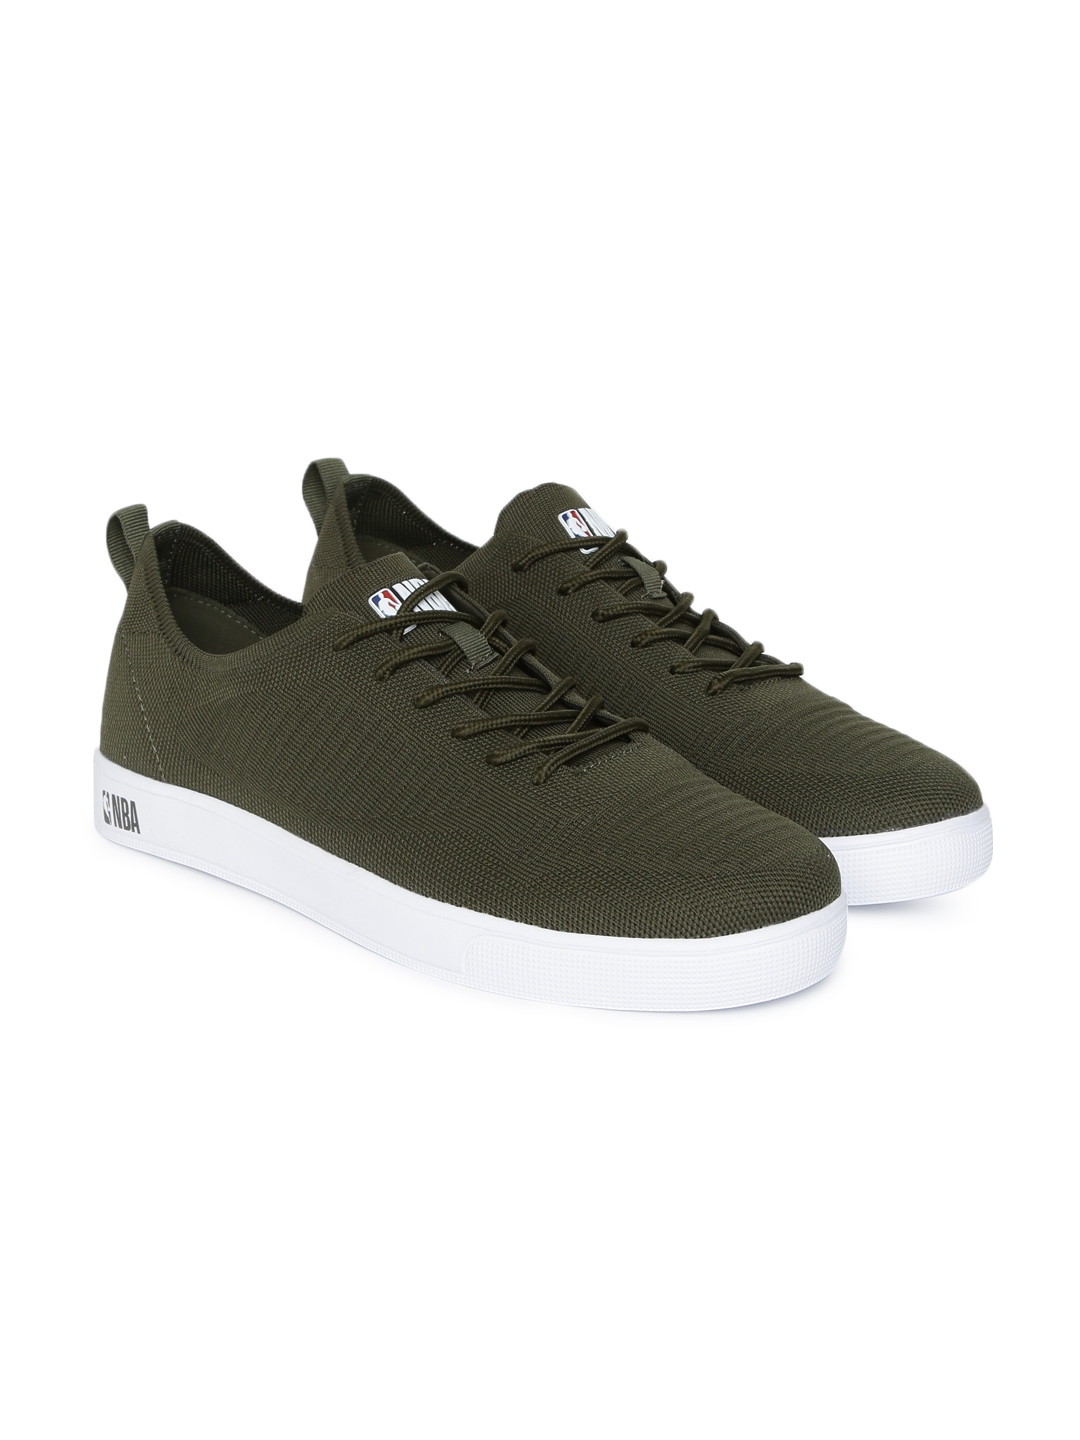 green olive sneakers